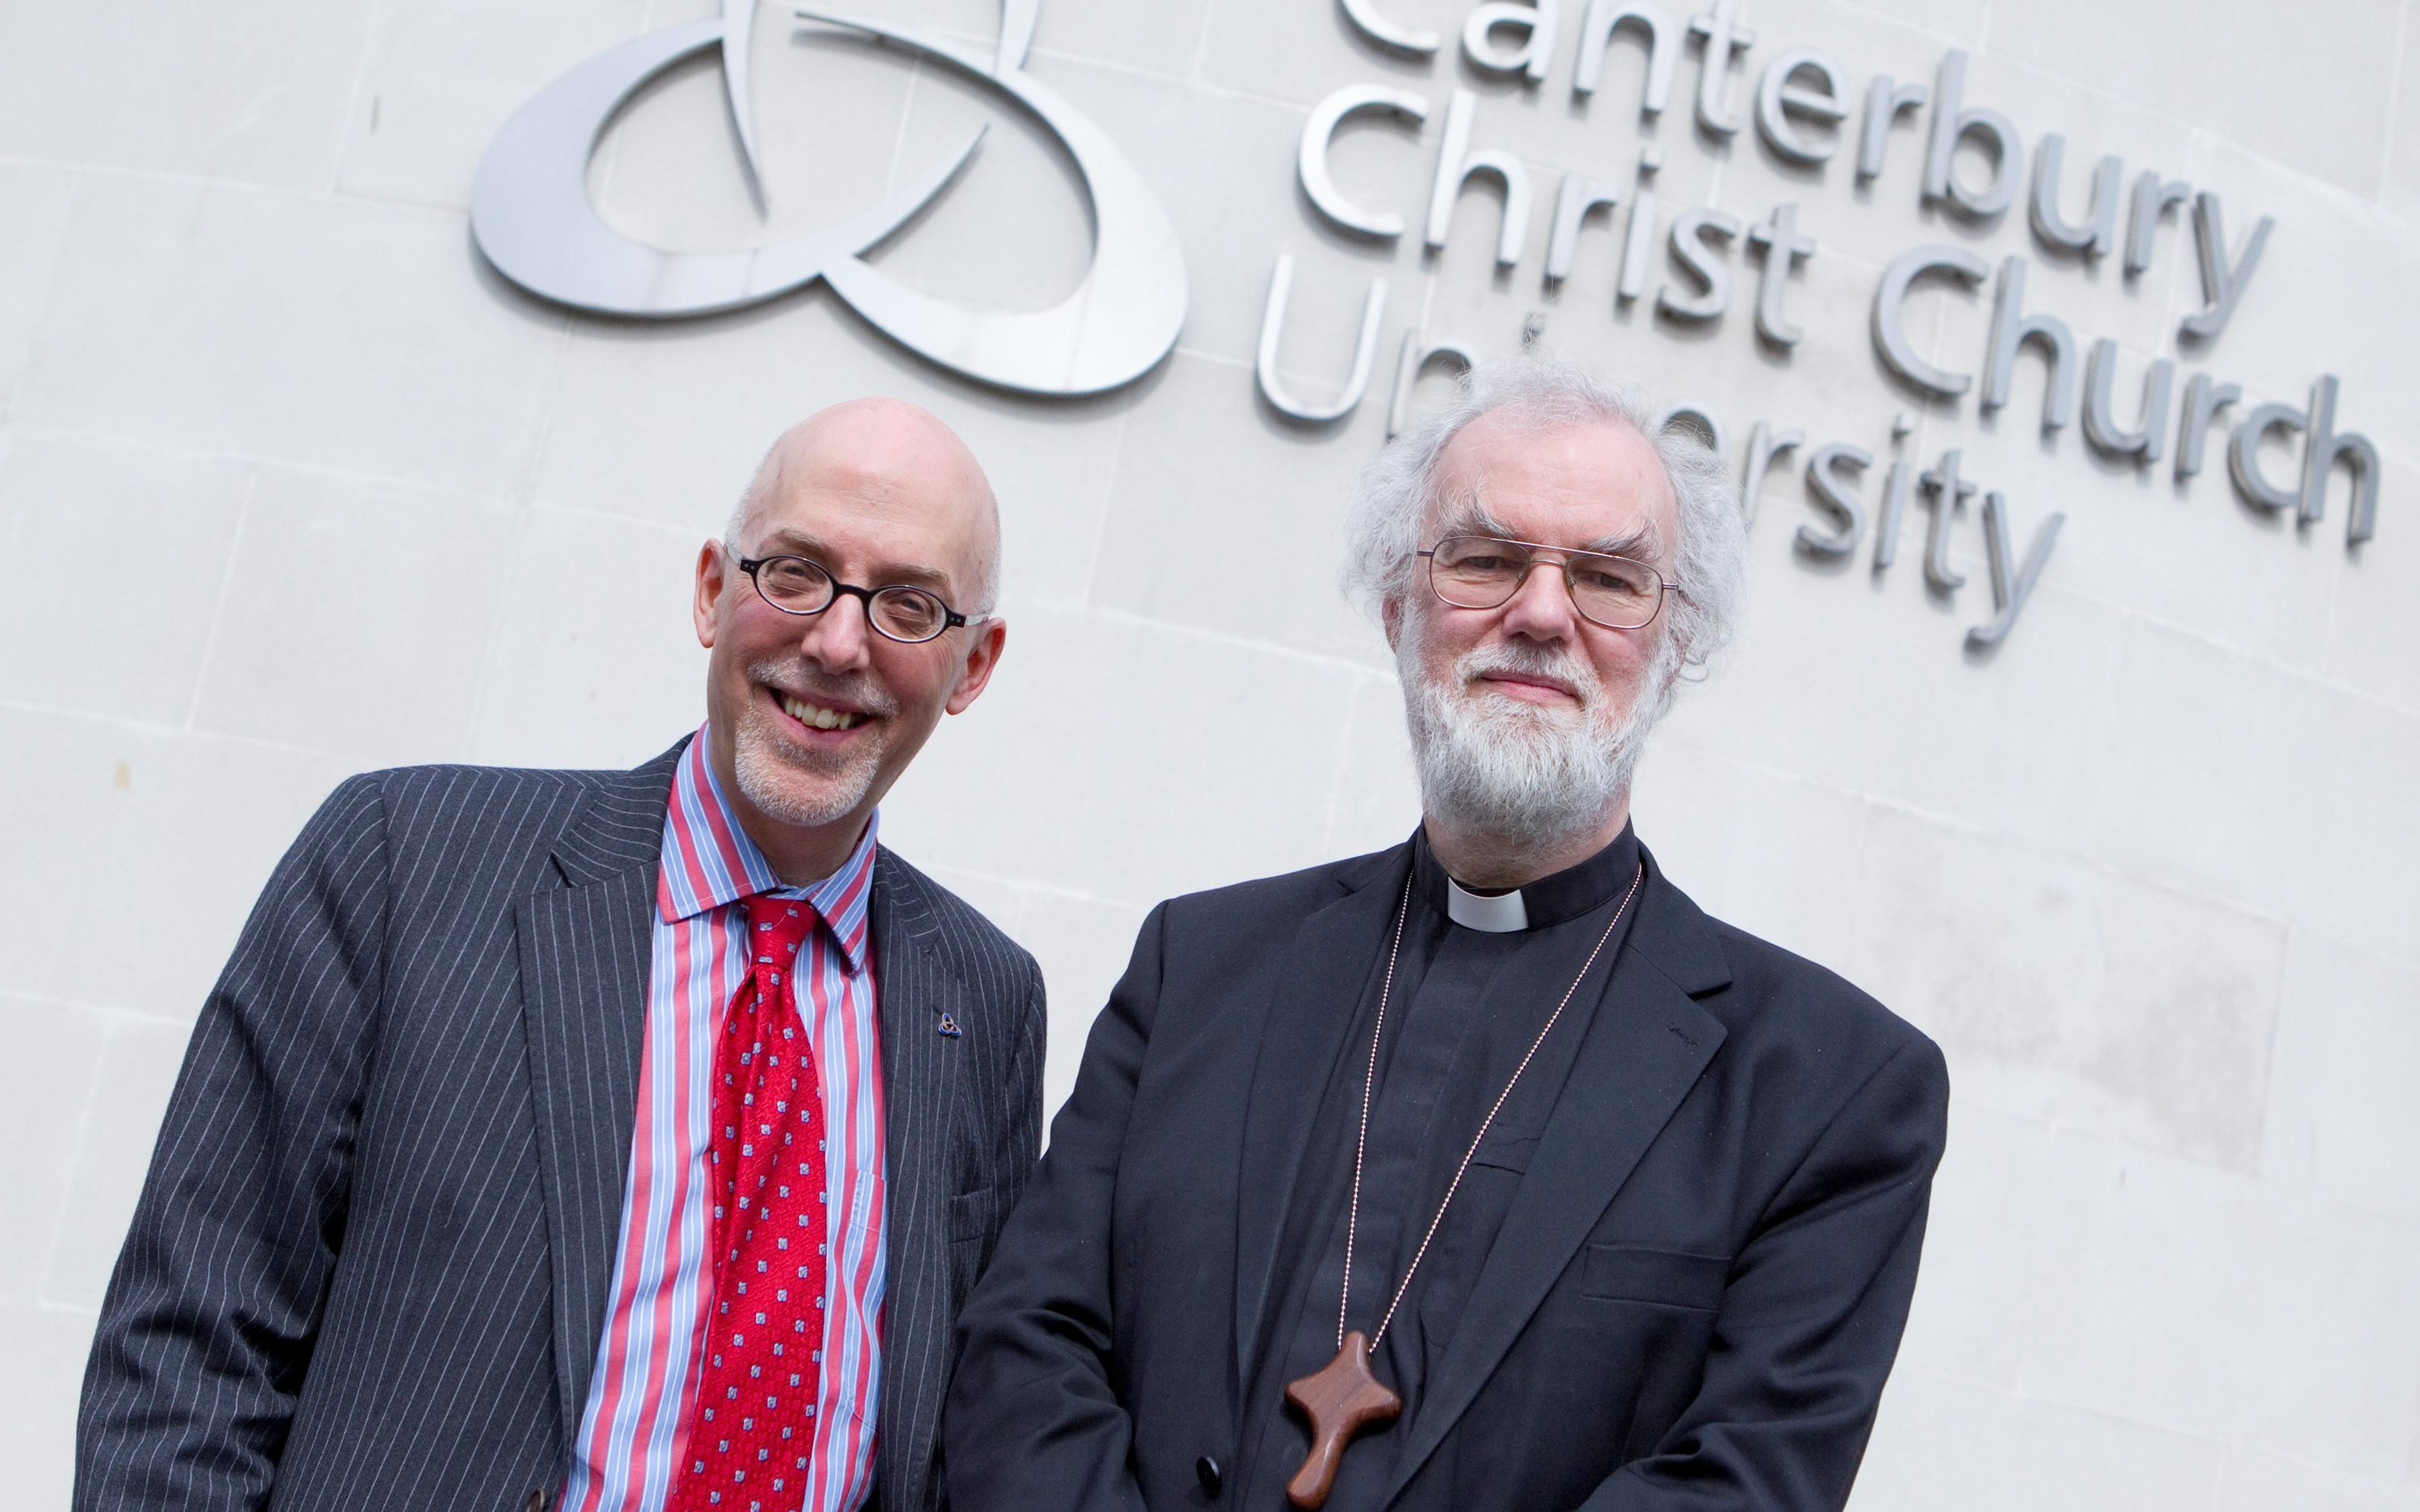 Inaugural CUAC Lecture by Archbishop of Canterbury to be seen around